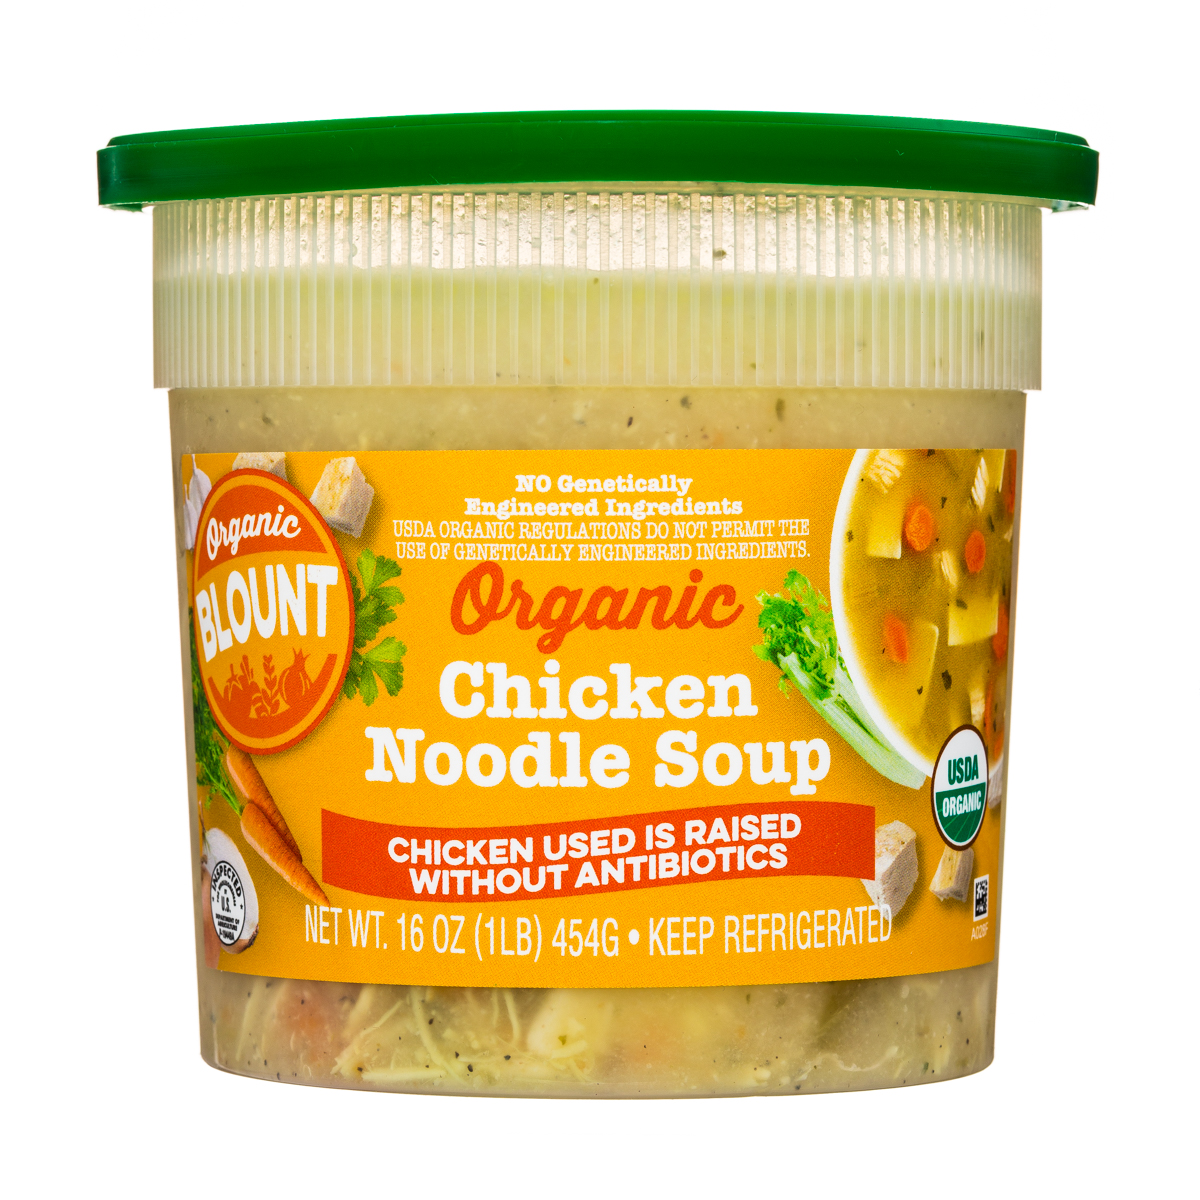 Organic Chicken Noodle Soup, 17 oz at Whole Foods Market